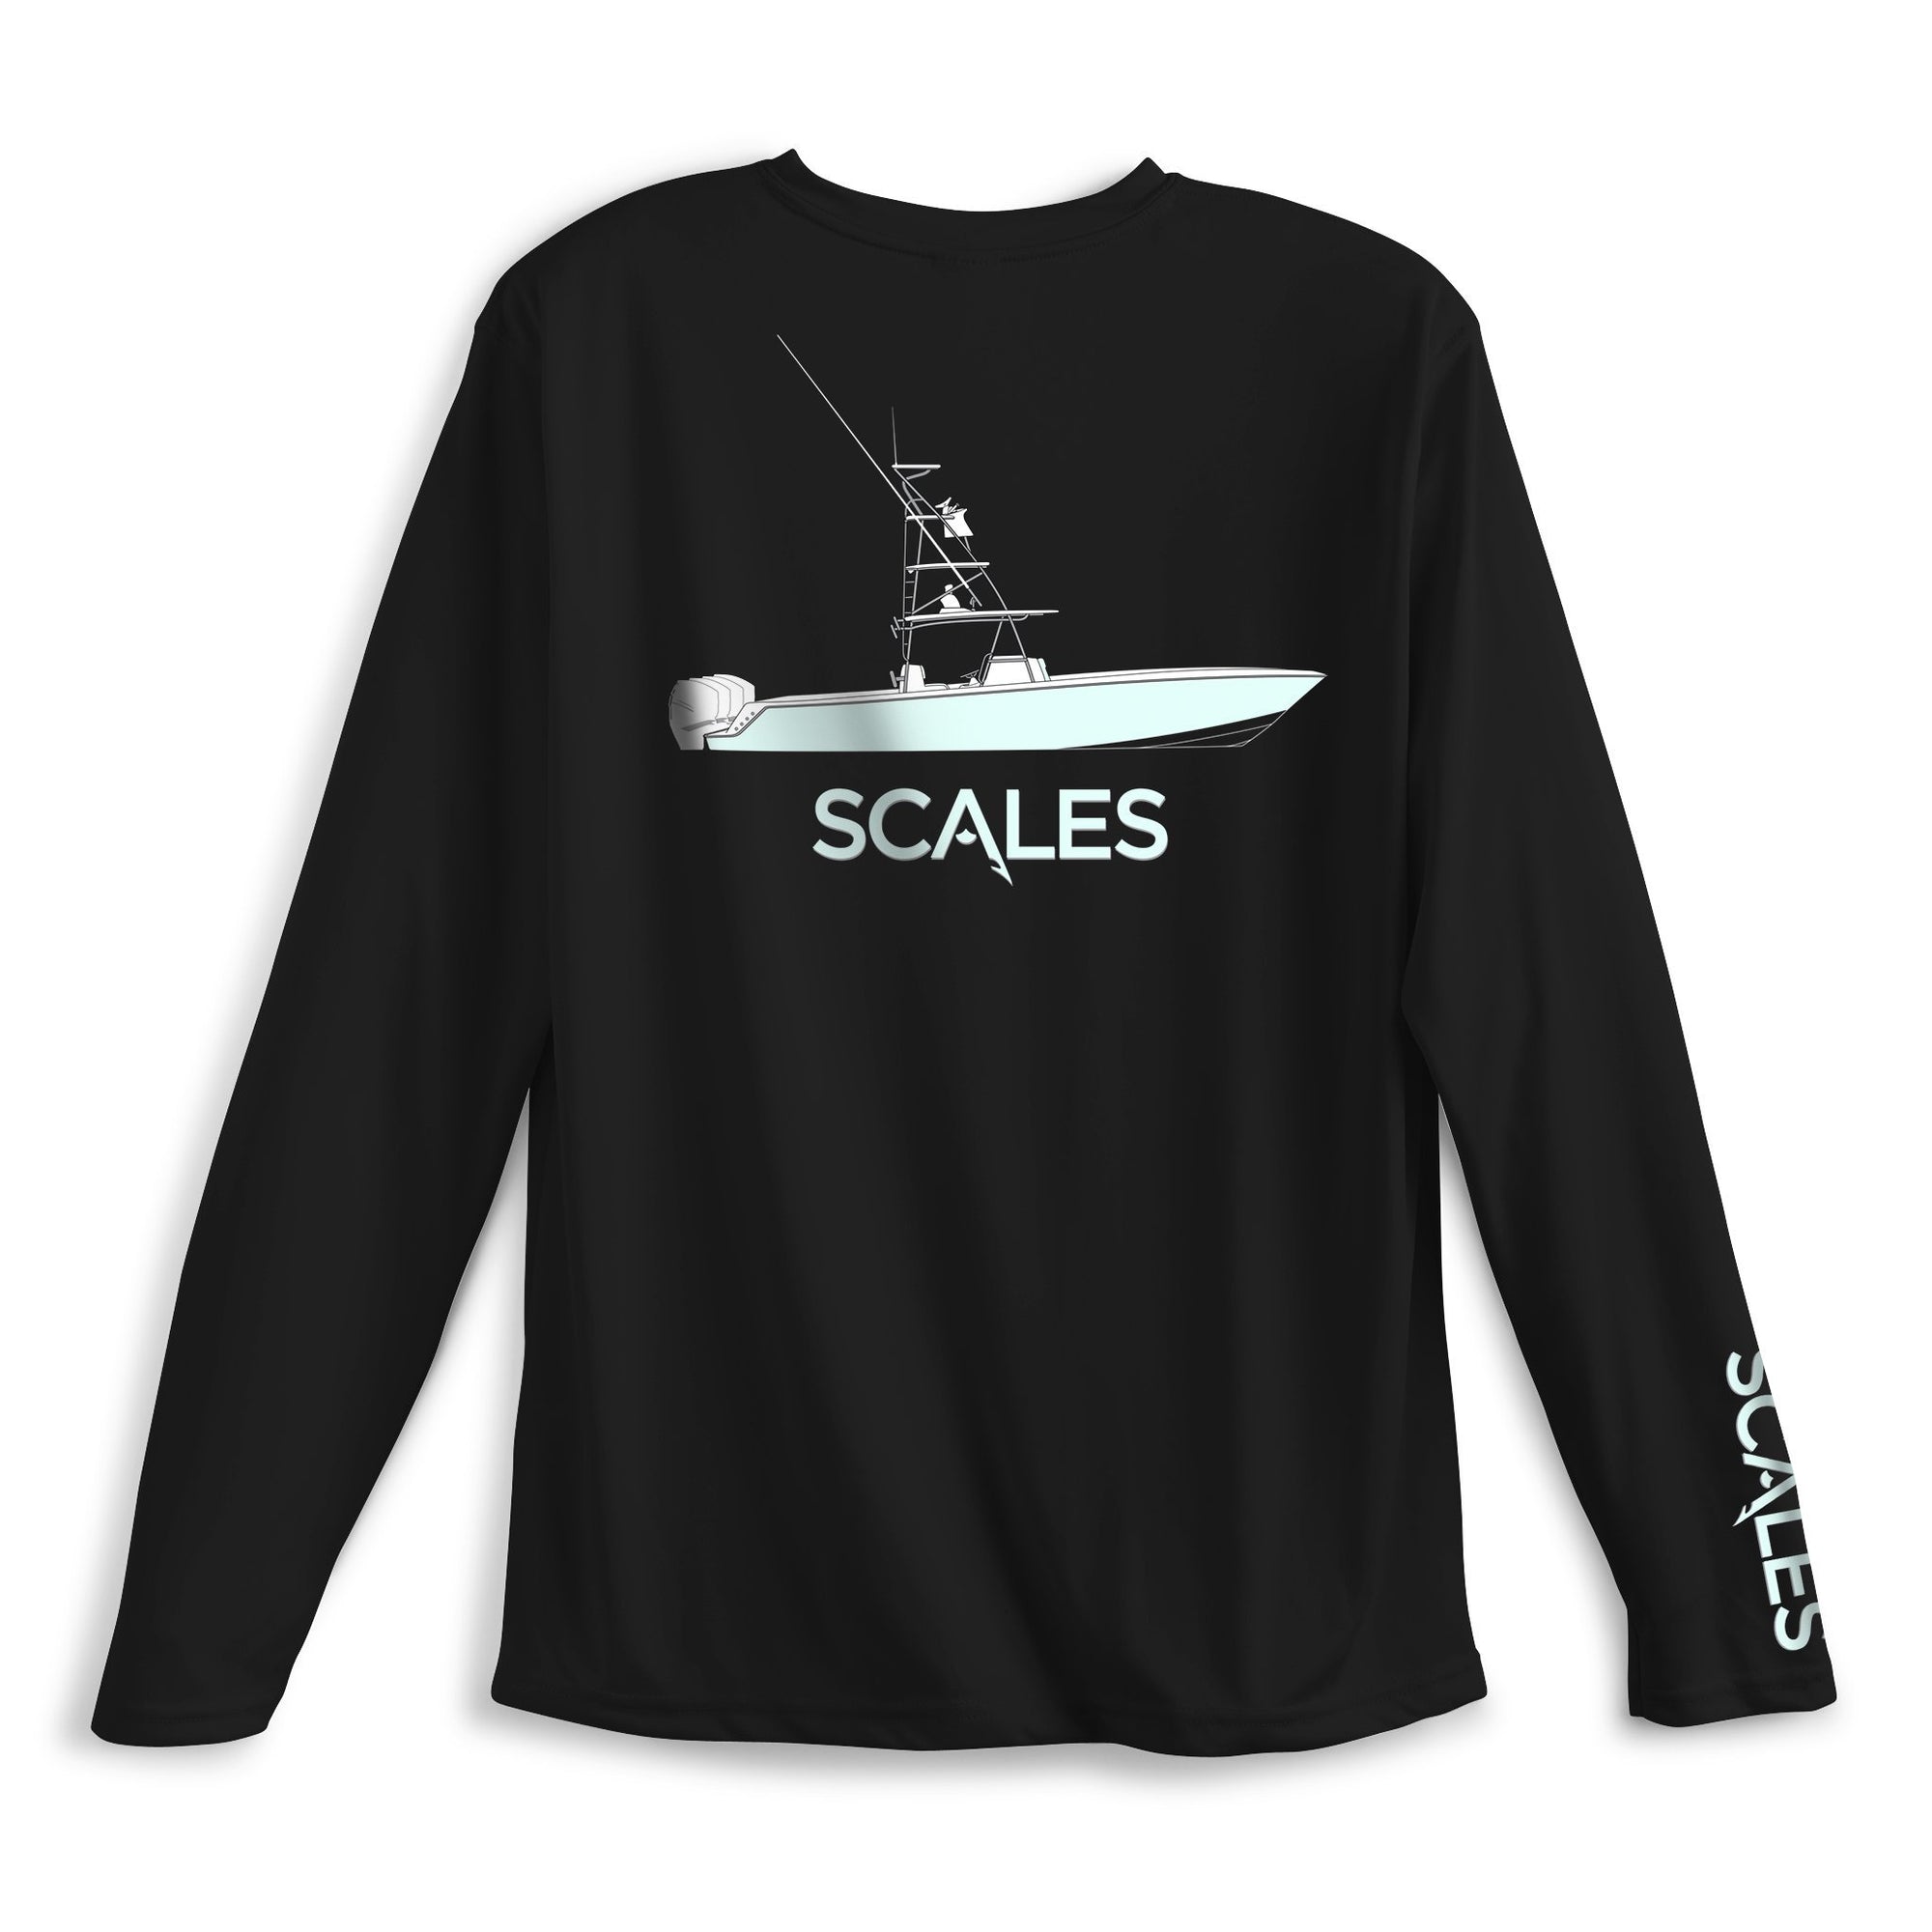 Scales Gear - Compleat Angler Nedlands Pro Tackle